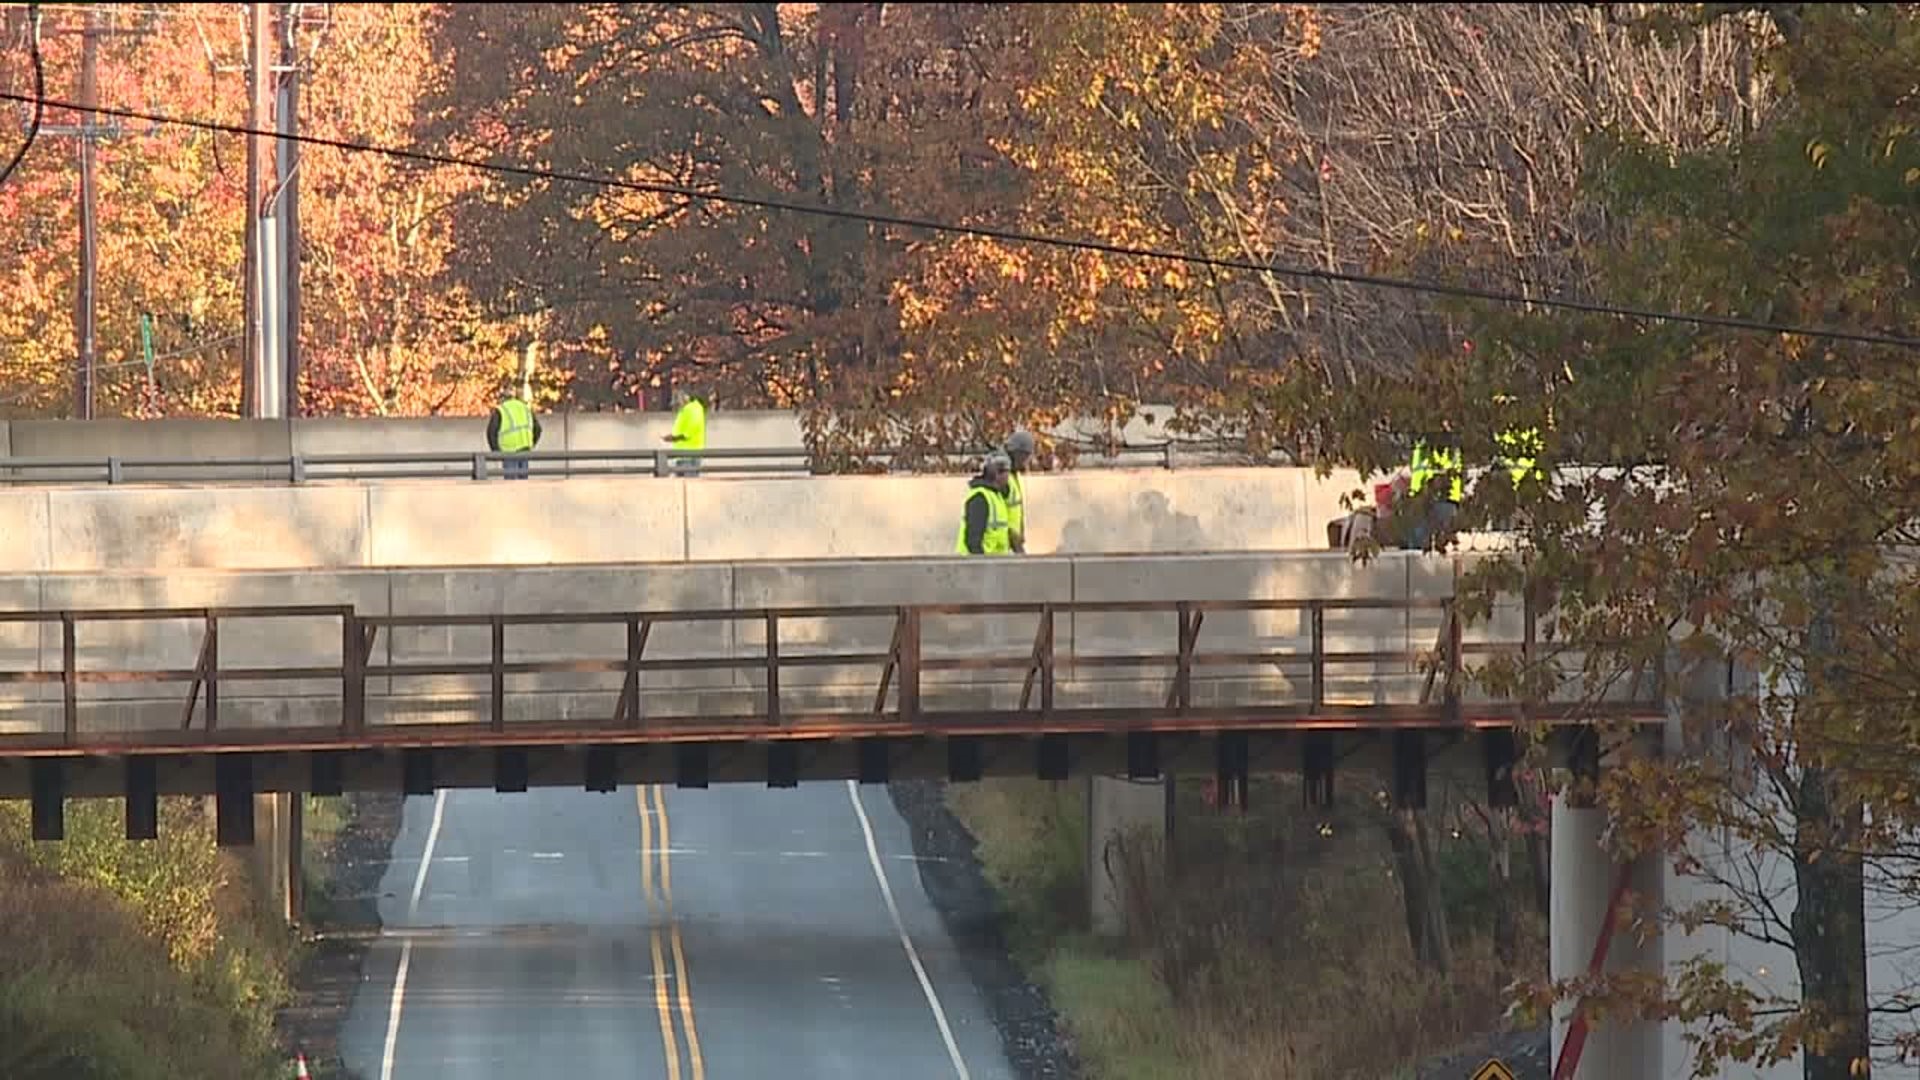 Interstate 84 Closed Due to Deteriorating Bridge in Pike County